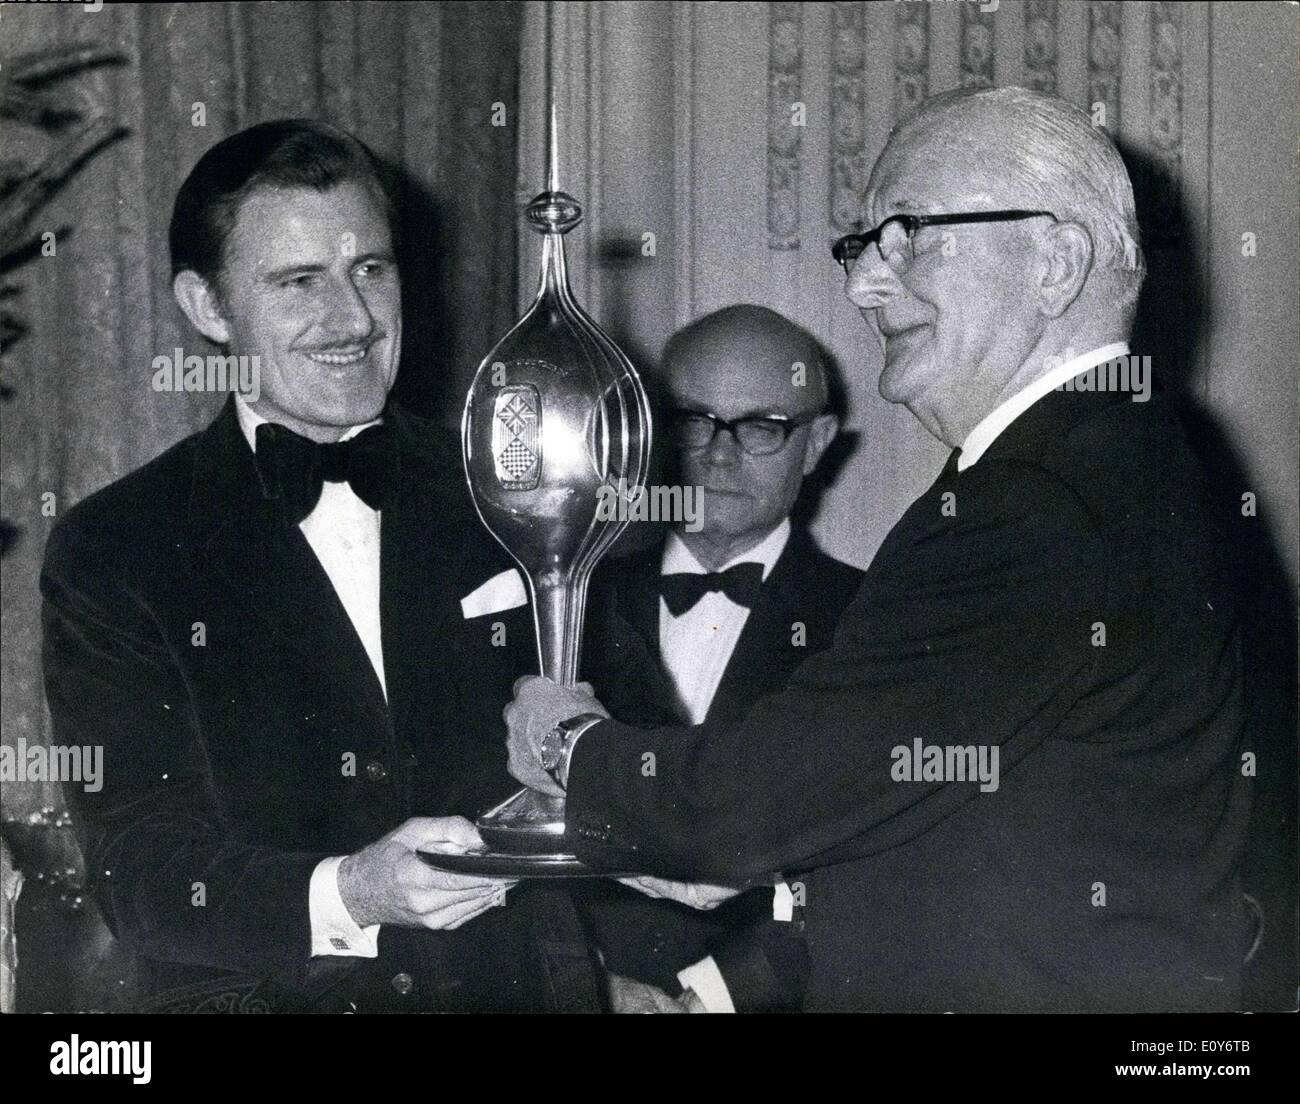 Dec. 12, 1968 - Presentation of the 1968 Motor Sport Awards racing driver Graham Hill Presented with two trophies: The presentation of the 1968 Motor Sport Awards took place last night at a dinner held at the Royal Automobile club, Pall Mall, London. Britain's racing driver Graham Hill, was presented with two trophies - the Hawthorn Memorial Trophy (set up in 1959 by the R.A.C to commemorate the death of racing driver Mike Hawthorn) - and the F.I.A. World Championship Trophy Stock Photo